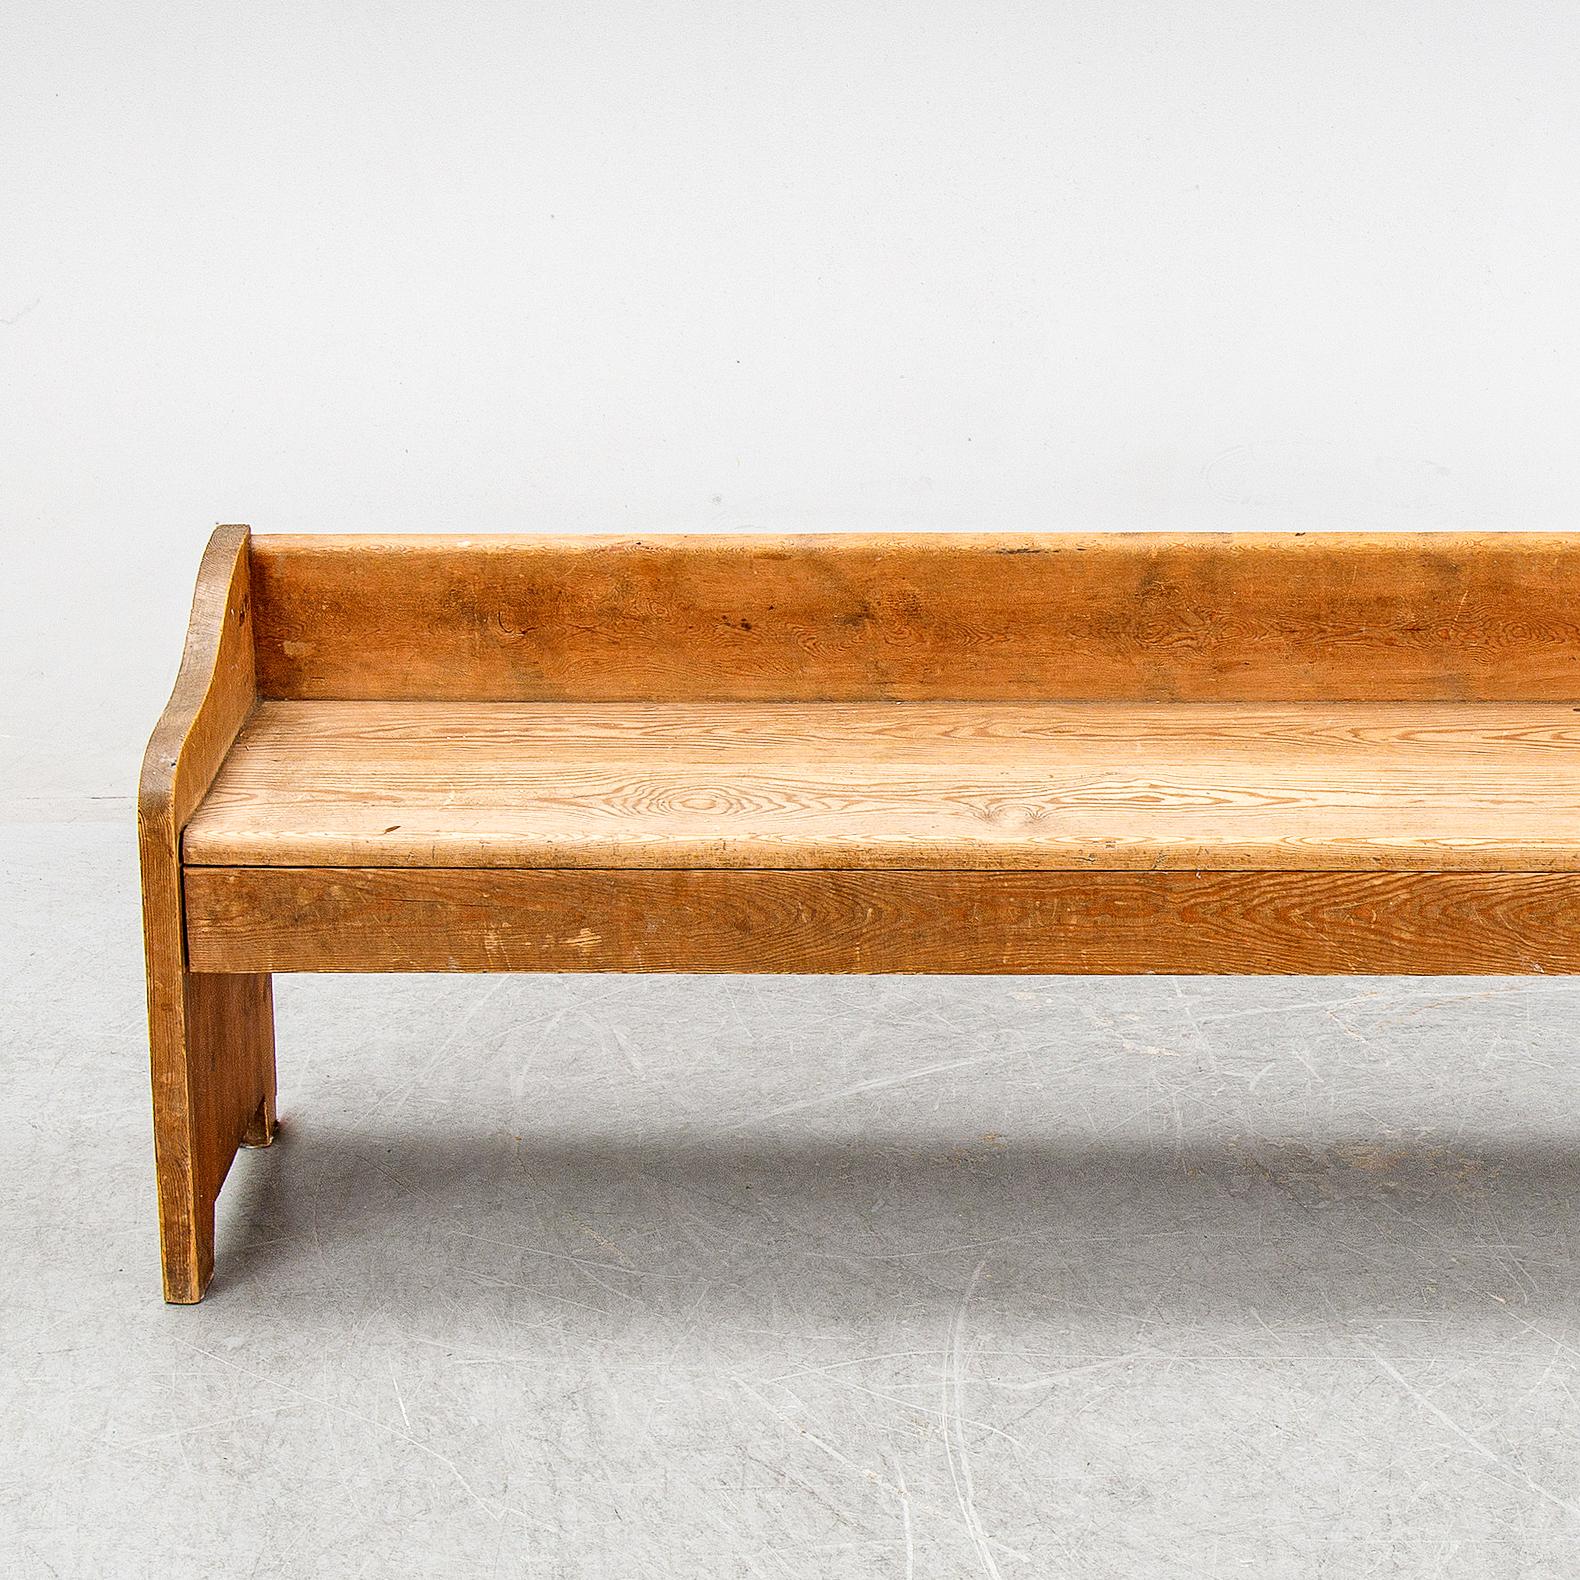 Stained Swedish Pine Sofa in style of Axel Einar Hjorth Produced in Sweden 1930s